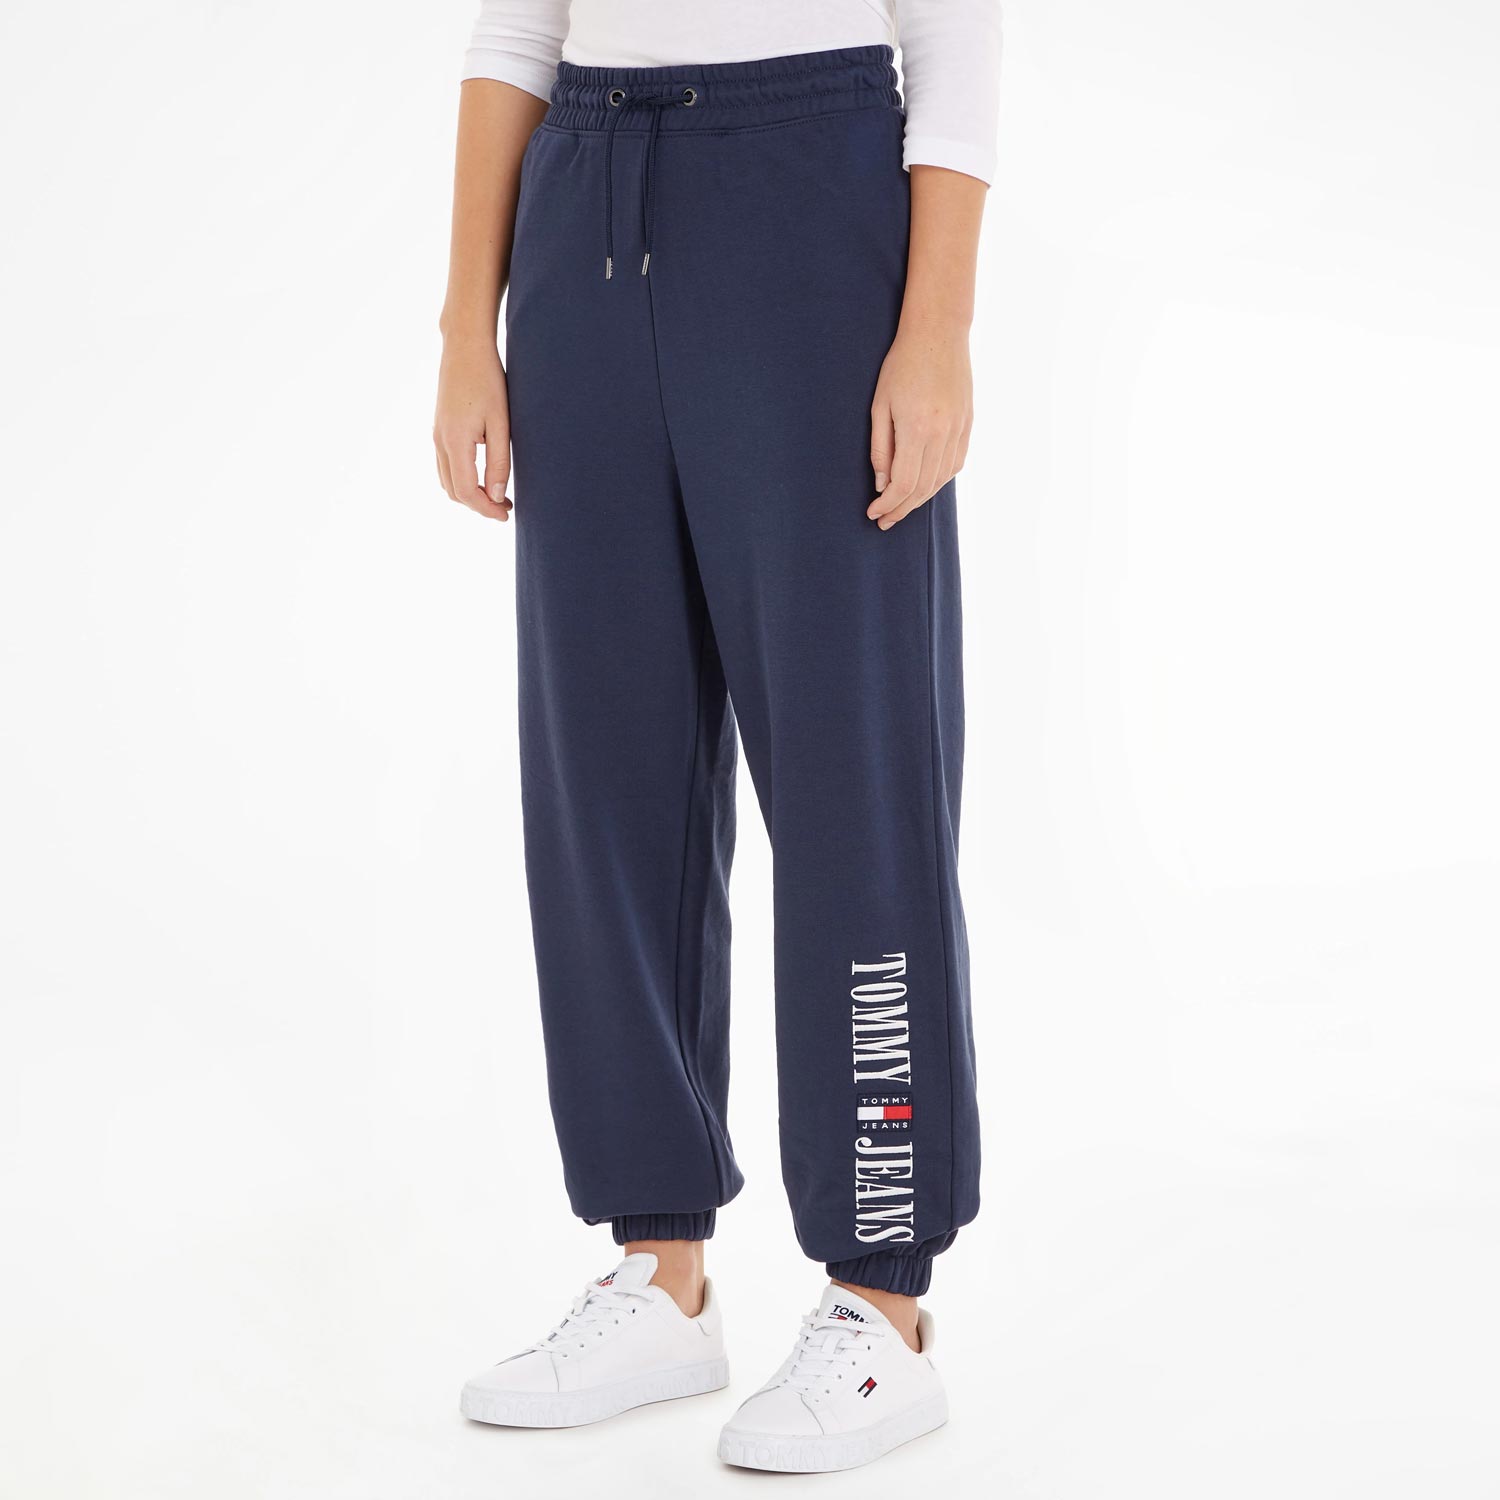 Tommy Jeans Women's Relaxed Archive Sweatpant - Twilight Navy